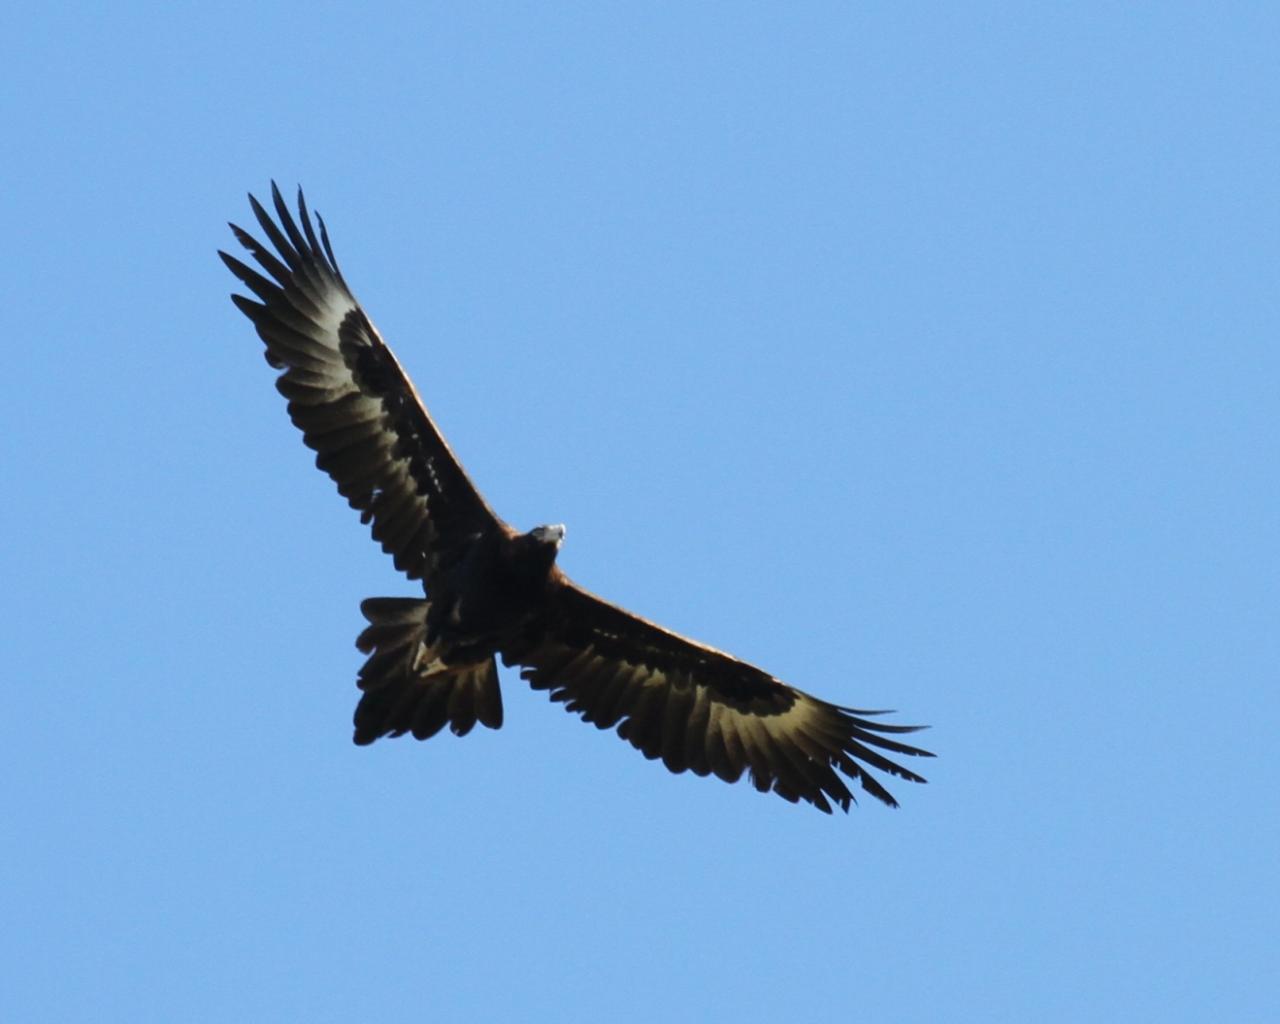 Wedge-tailed eagle and little falcon | BIRDS in BACKYARDS